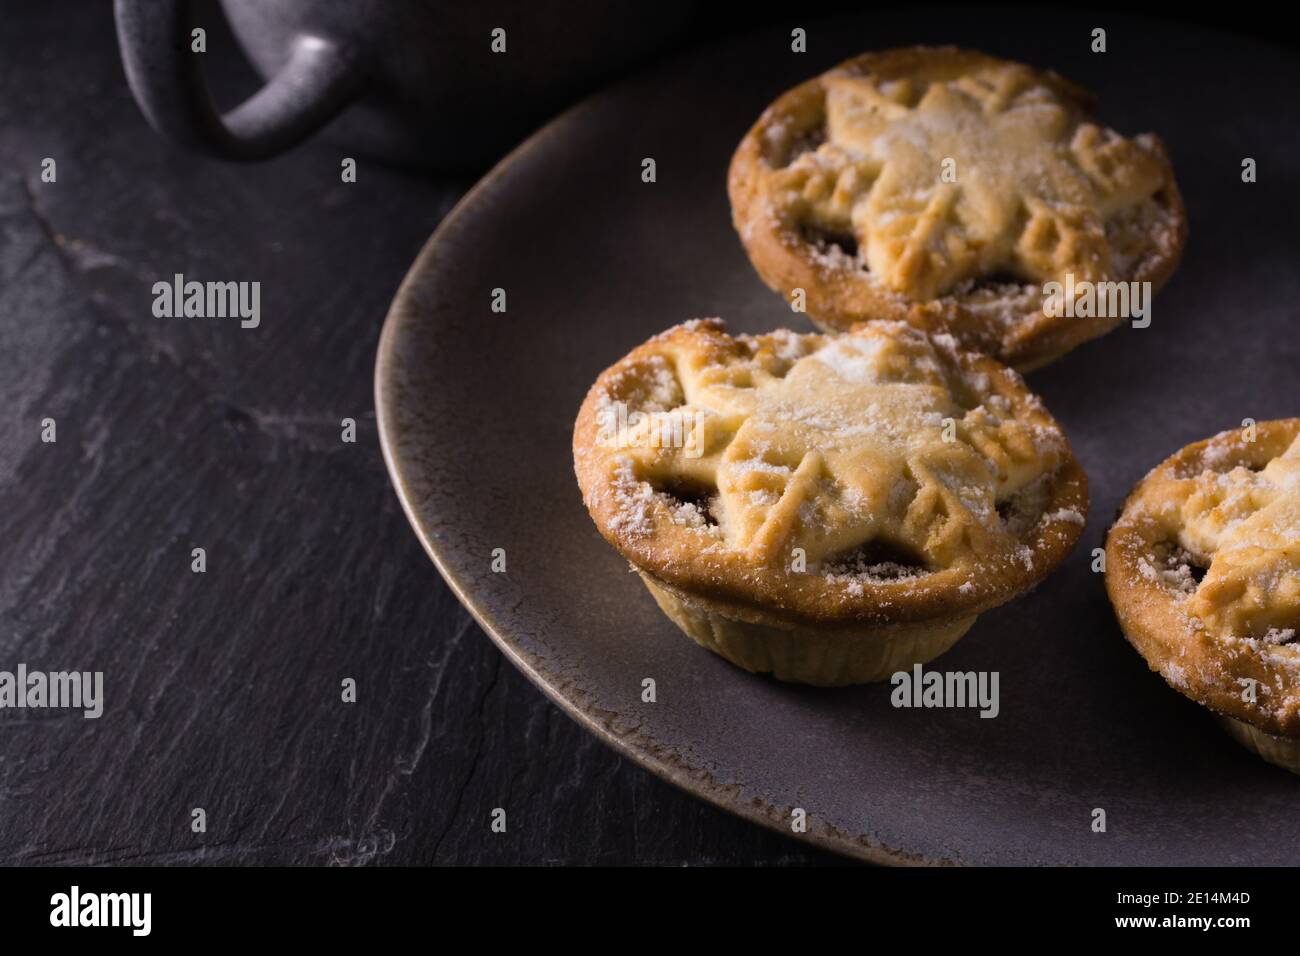 Traditional mince pies filled with a mix of dried fruits and spices called mincemeat and traditionally served at Christmas Stock Photo